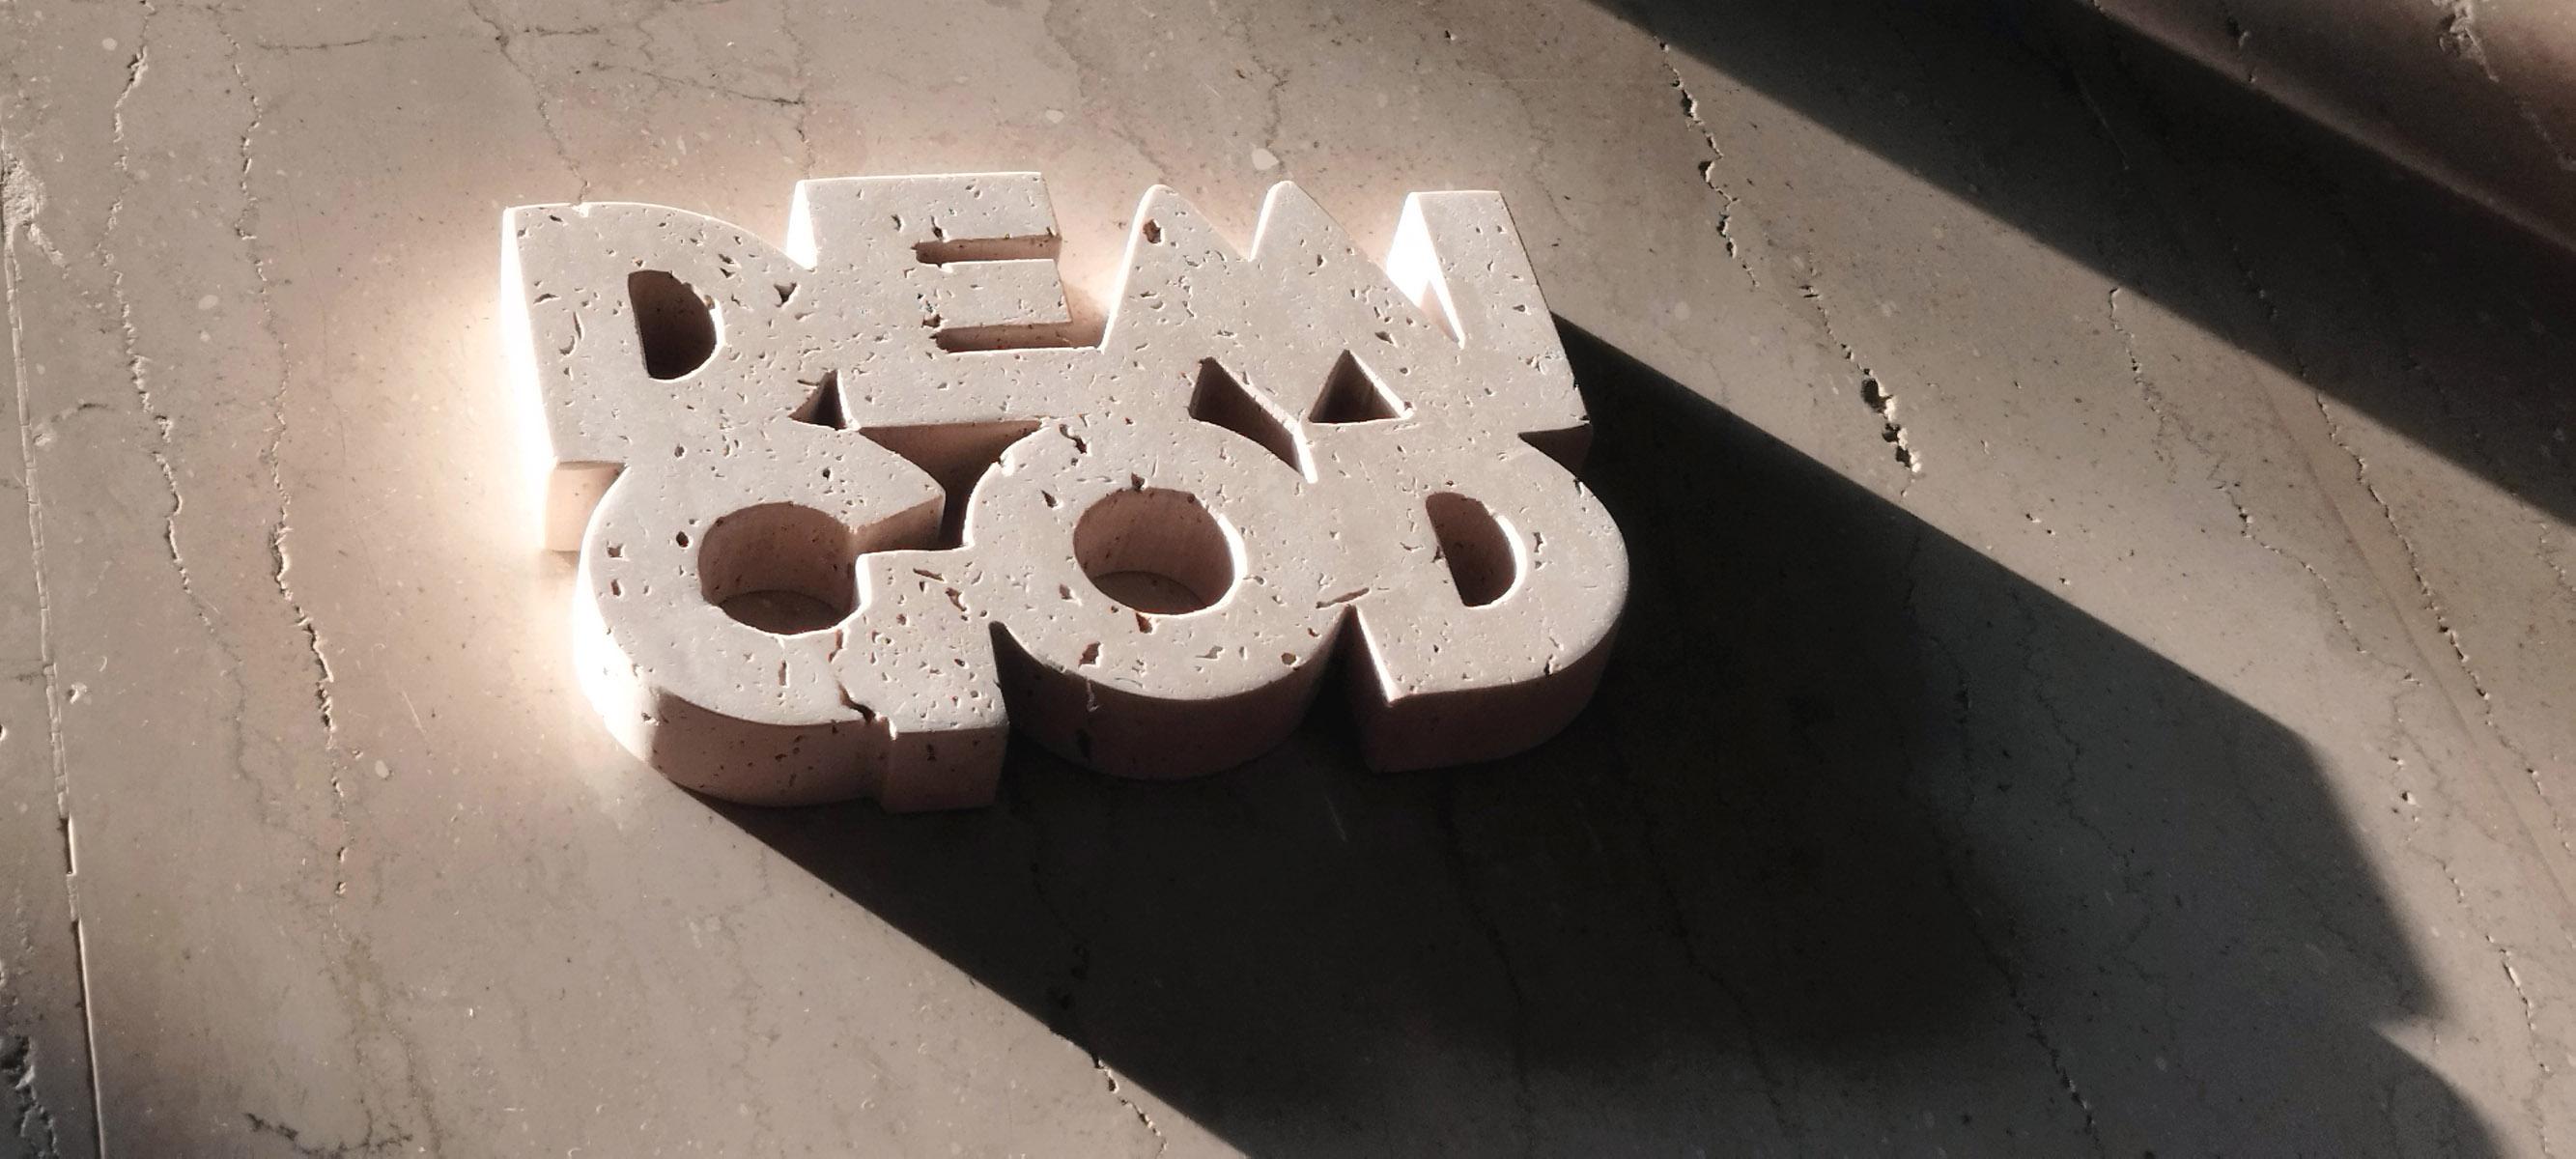 Demigod, a trivet cut in solid travertine For Sale 3